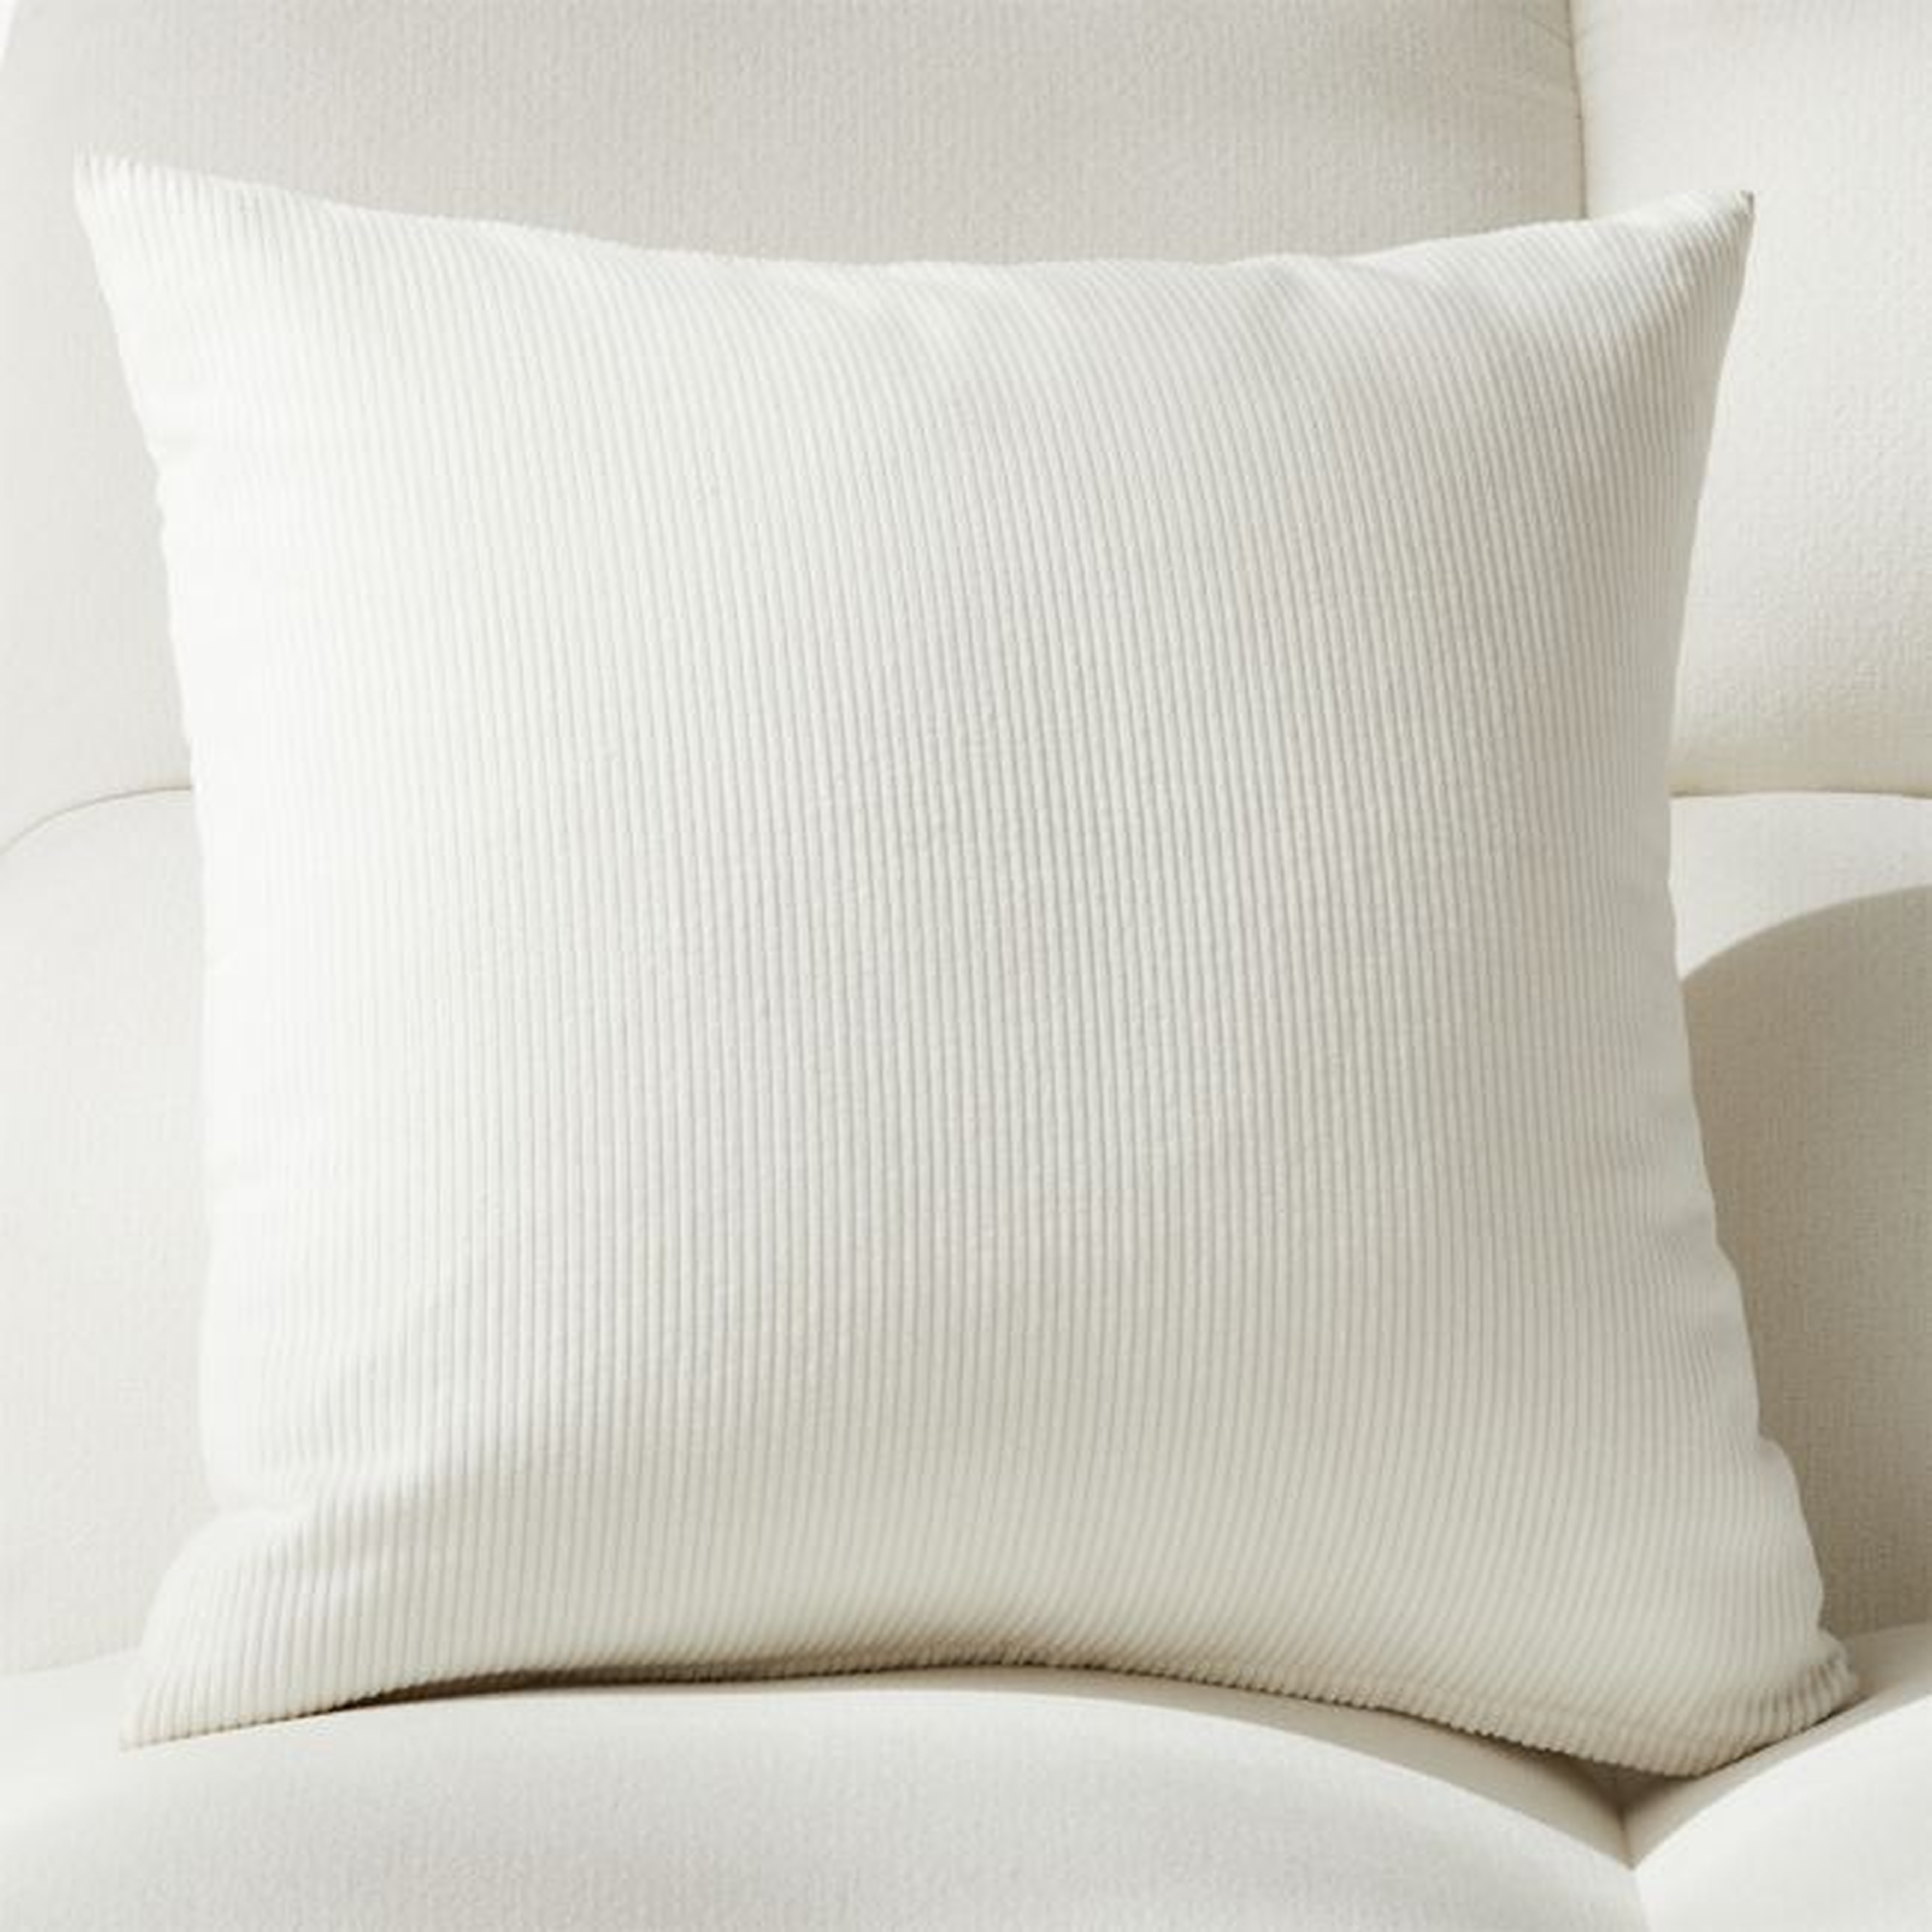 20" Anywhere Pillow with Feather-Down Insert - CB2